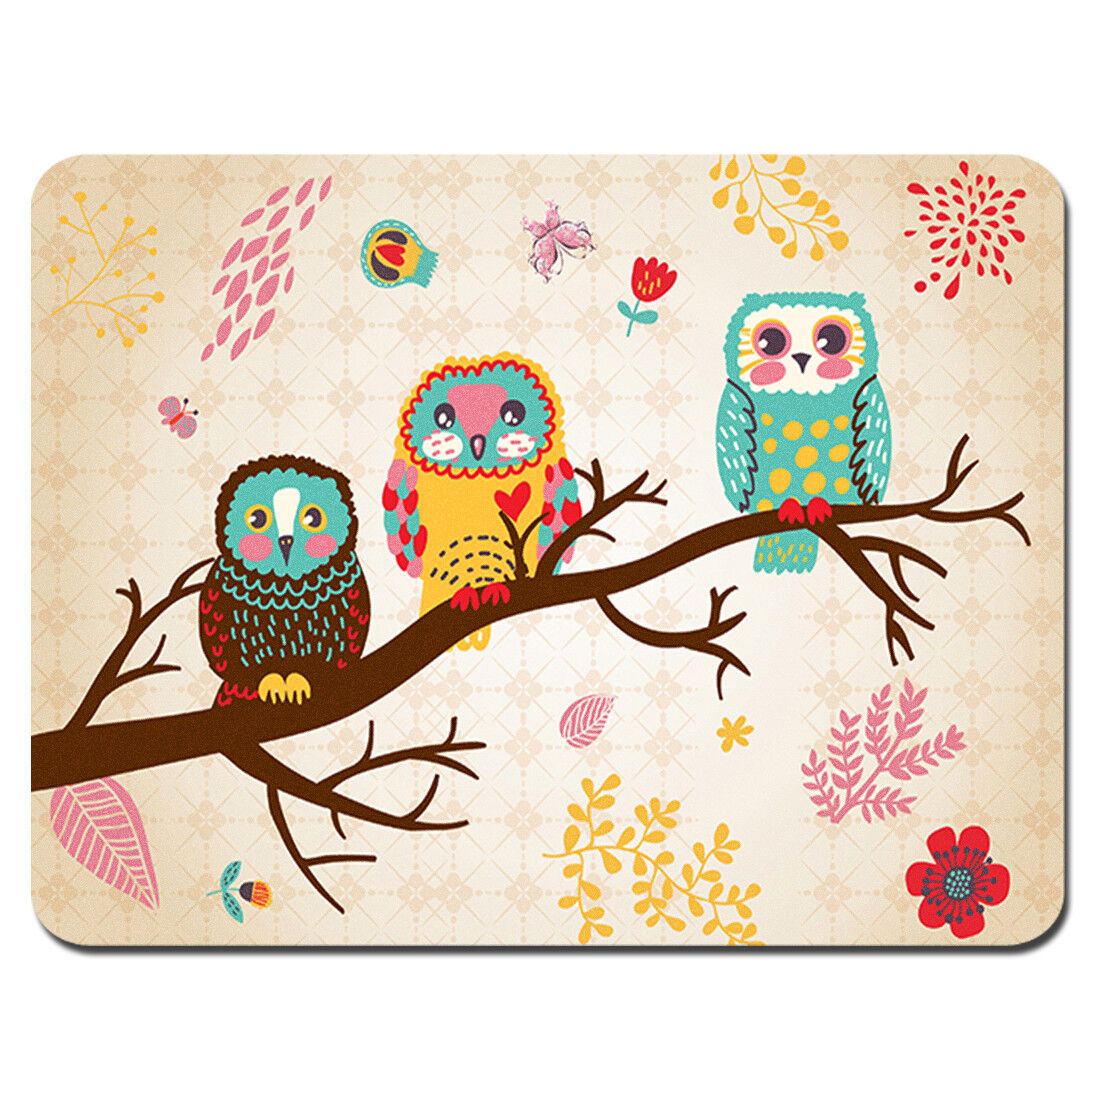 Soft Mouse Pad Neoprene Laptop Computer MousePad Picture Pictorial Design 3080